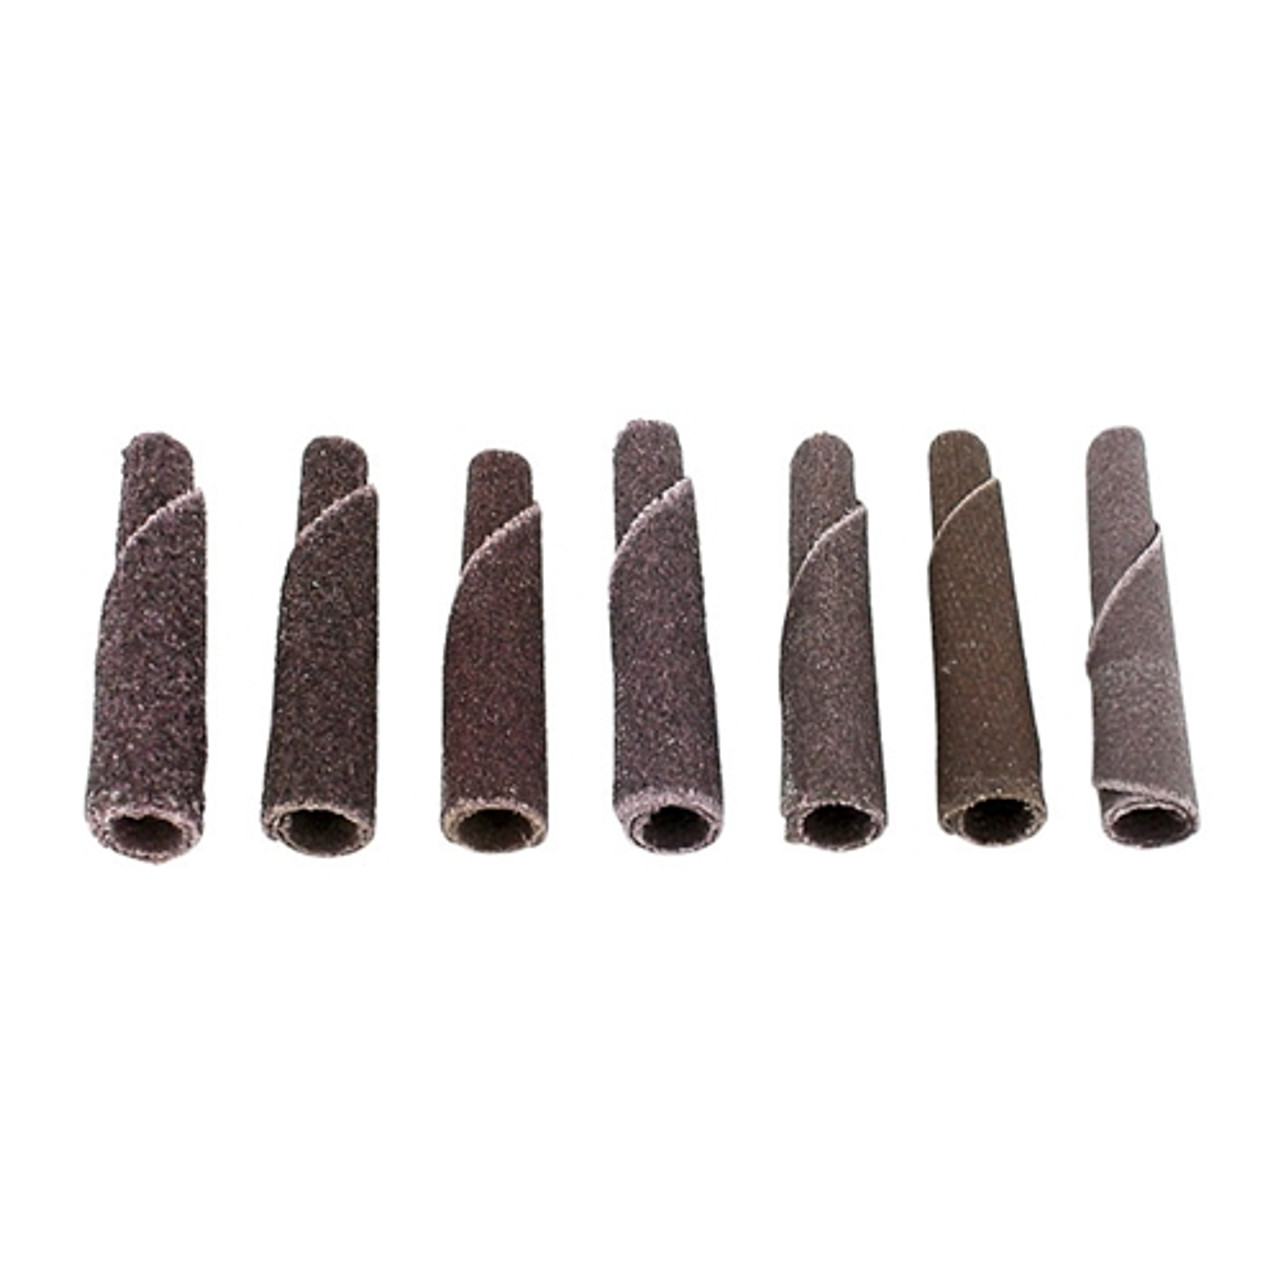 1-1/2" Tapered Cone Points - B-2, 180 Grit